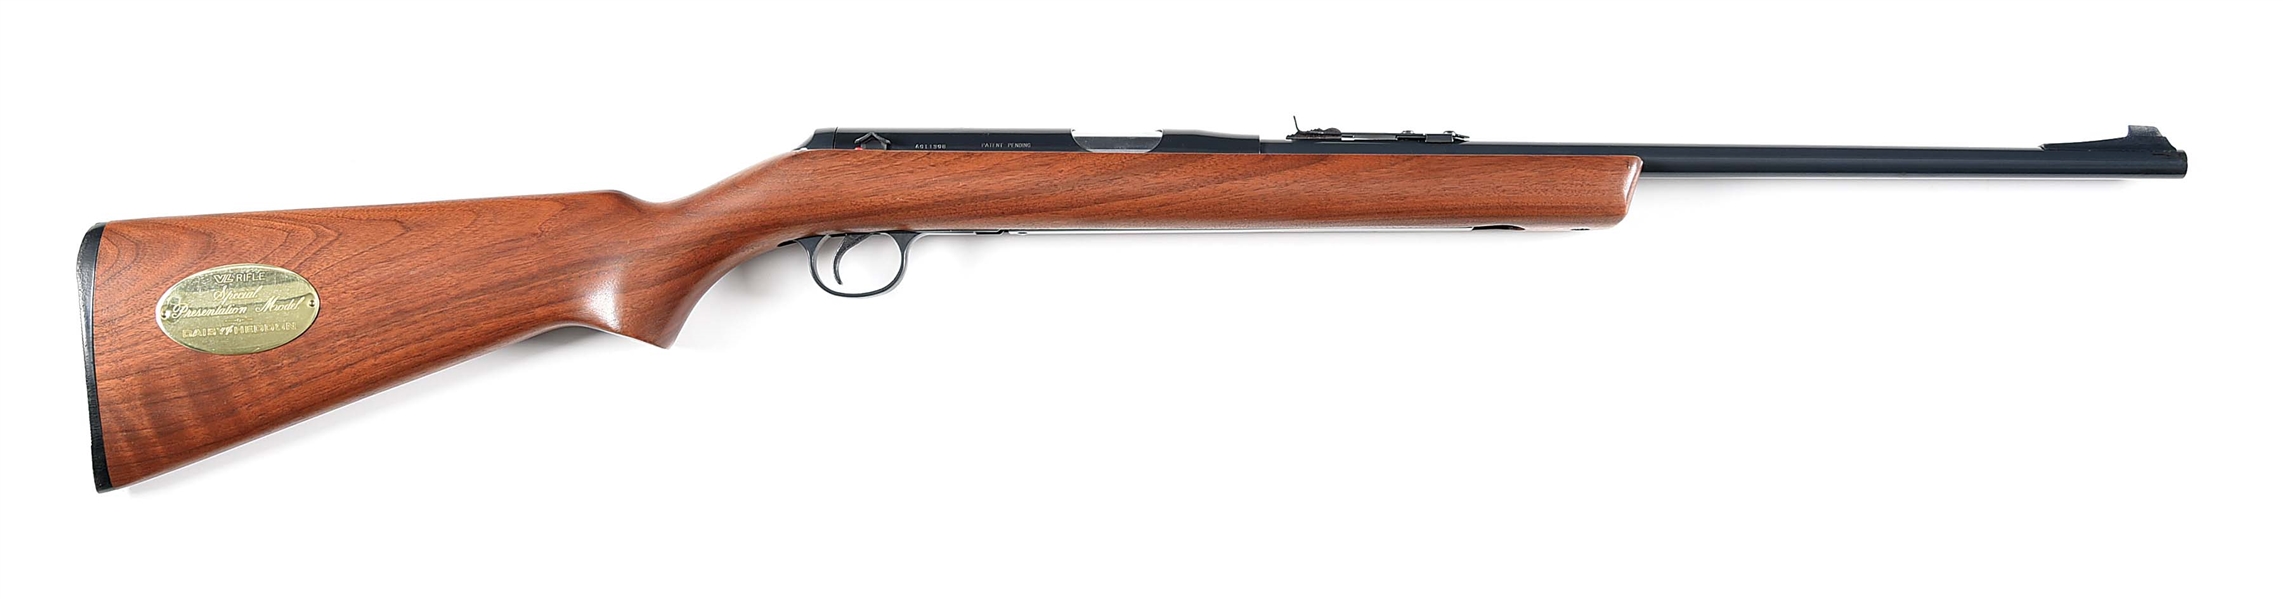 (C) SPECIAL PRESENTAION MODEL DAISY MODEL VL SINGLE SHOT RIFLE WITH CASE AND AMMUNITION.